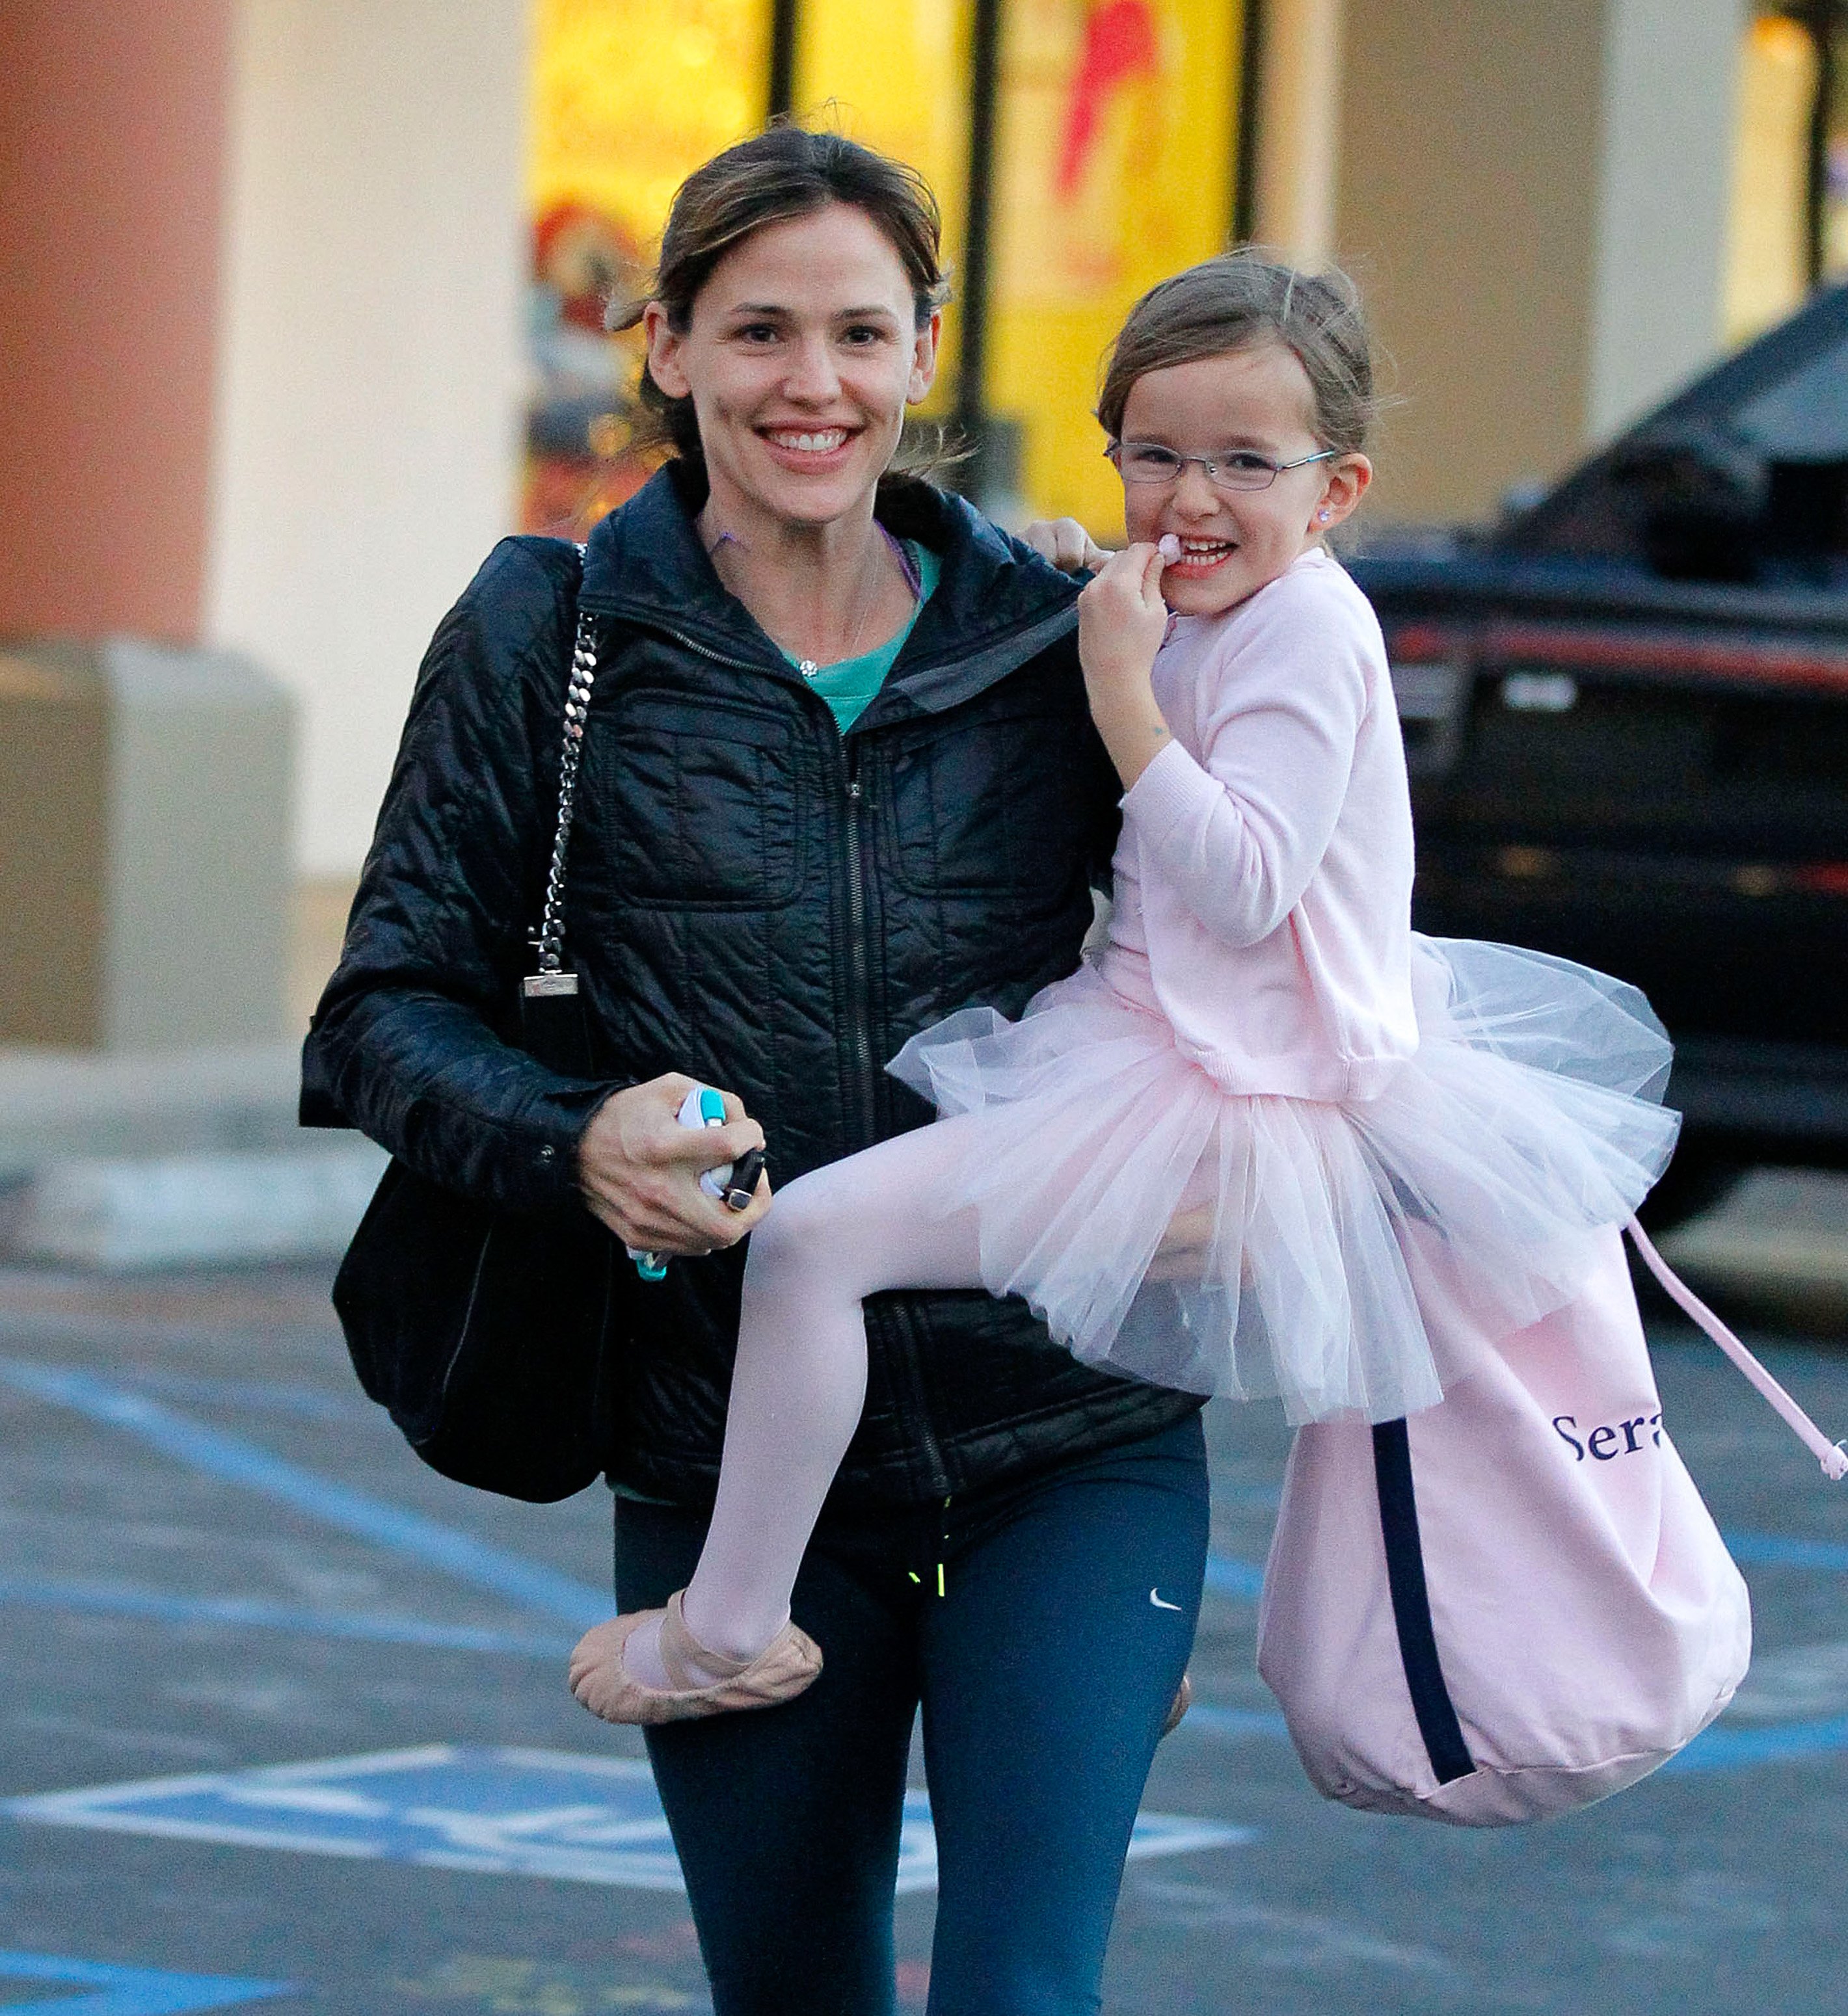 Jennifer Garner and Seraphina Affleck are seen on December 13, 2013 in Los Angeles, California. | Source: Getty Images